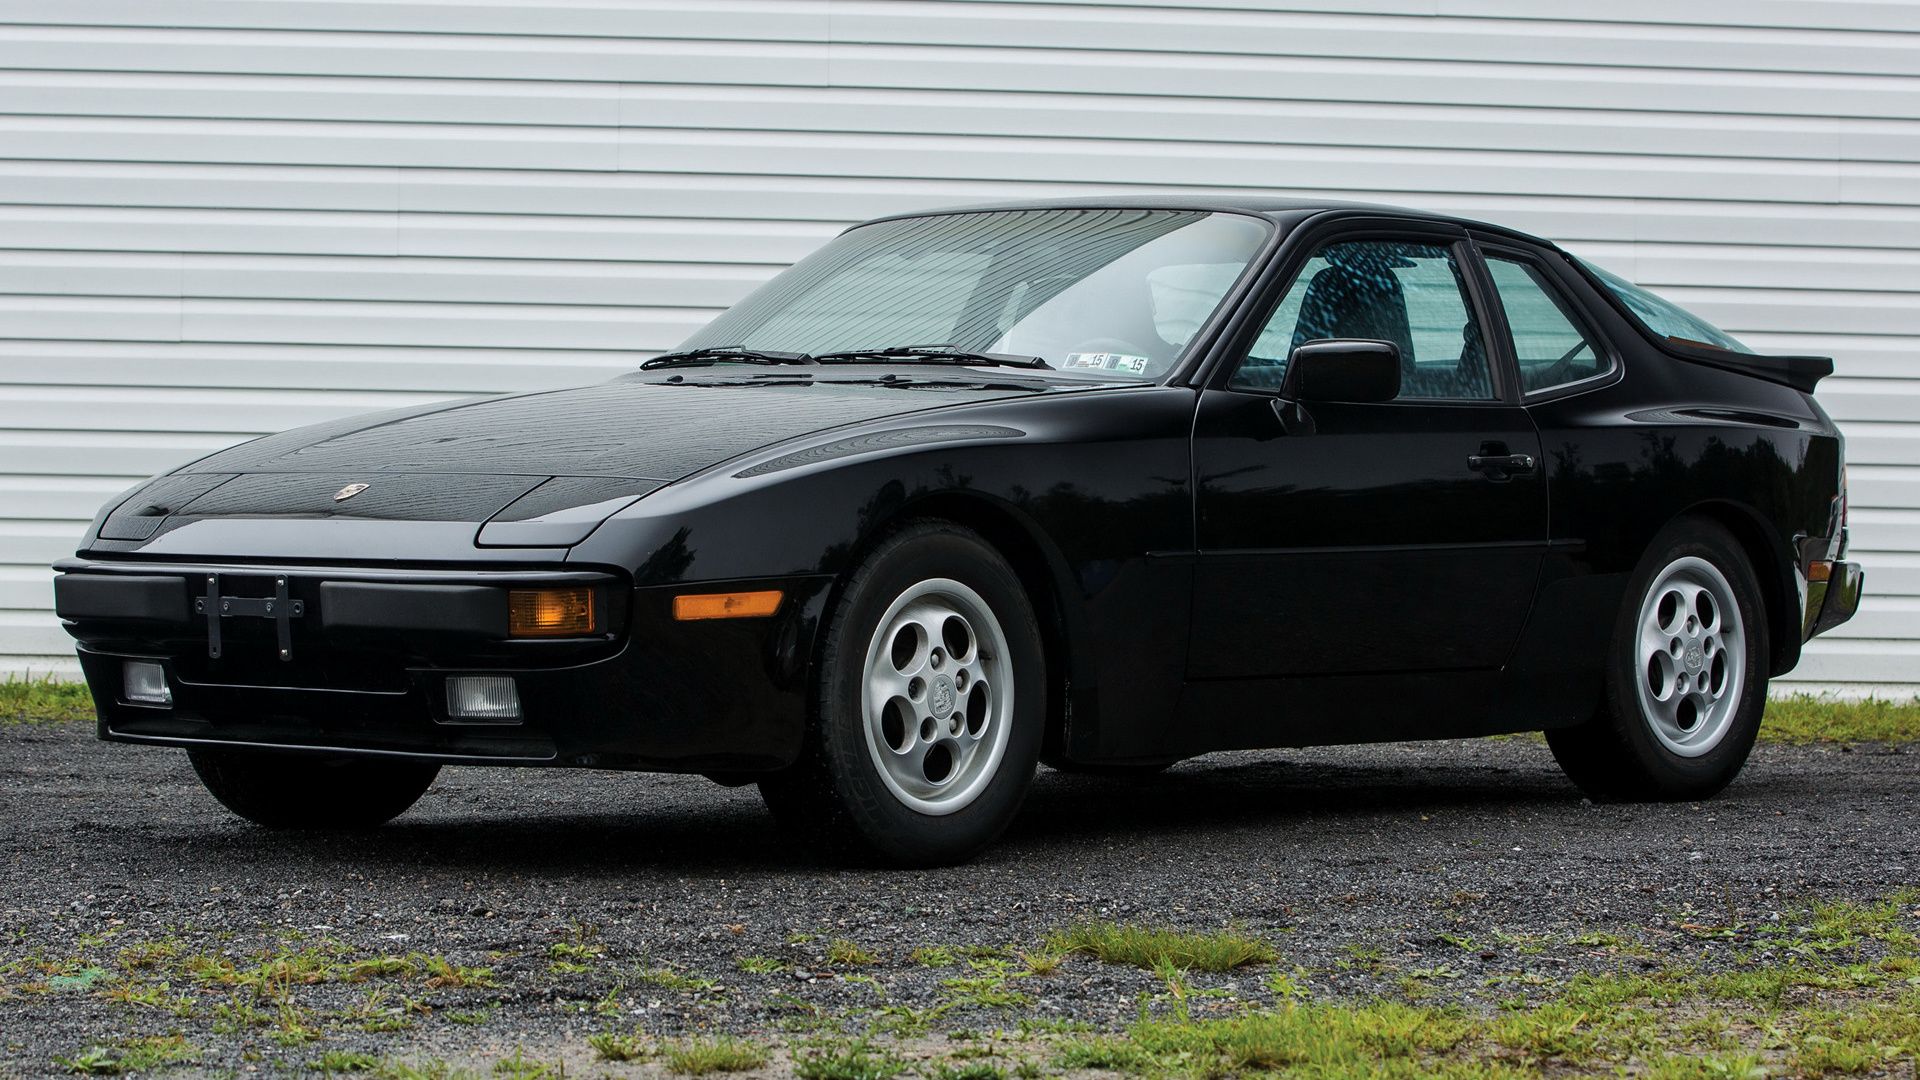 Porsche 944 (US) and HD Image